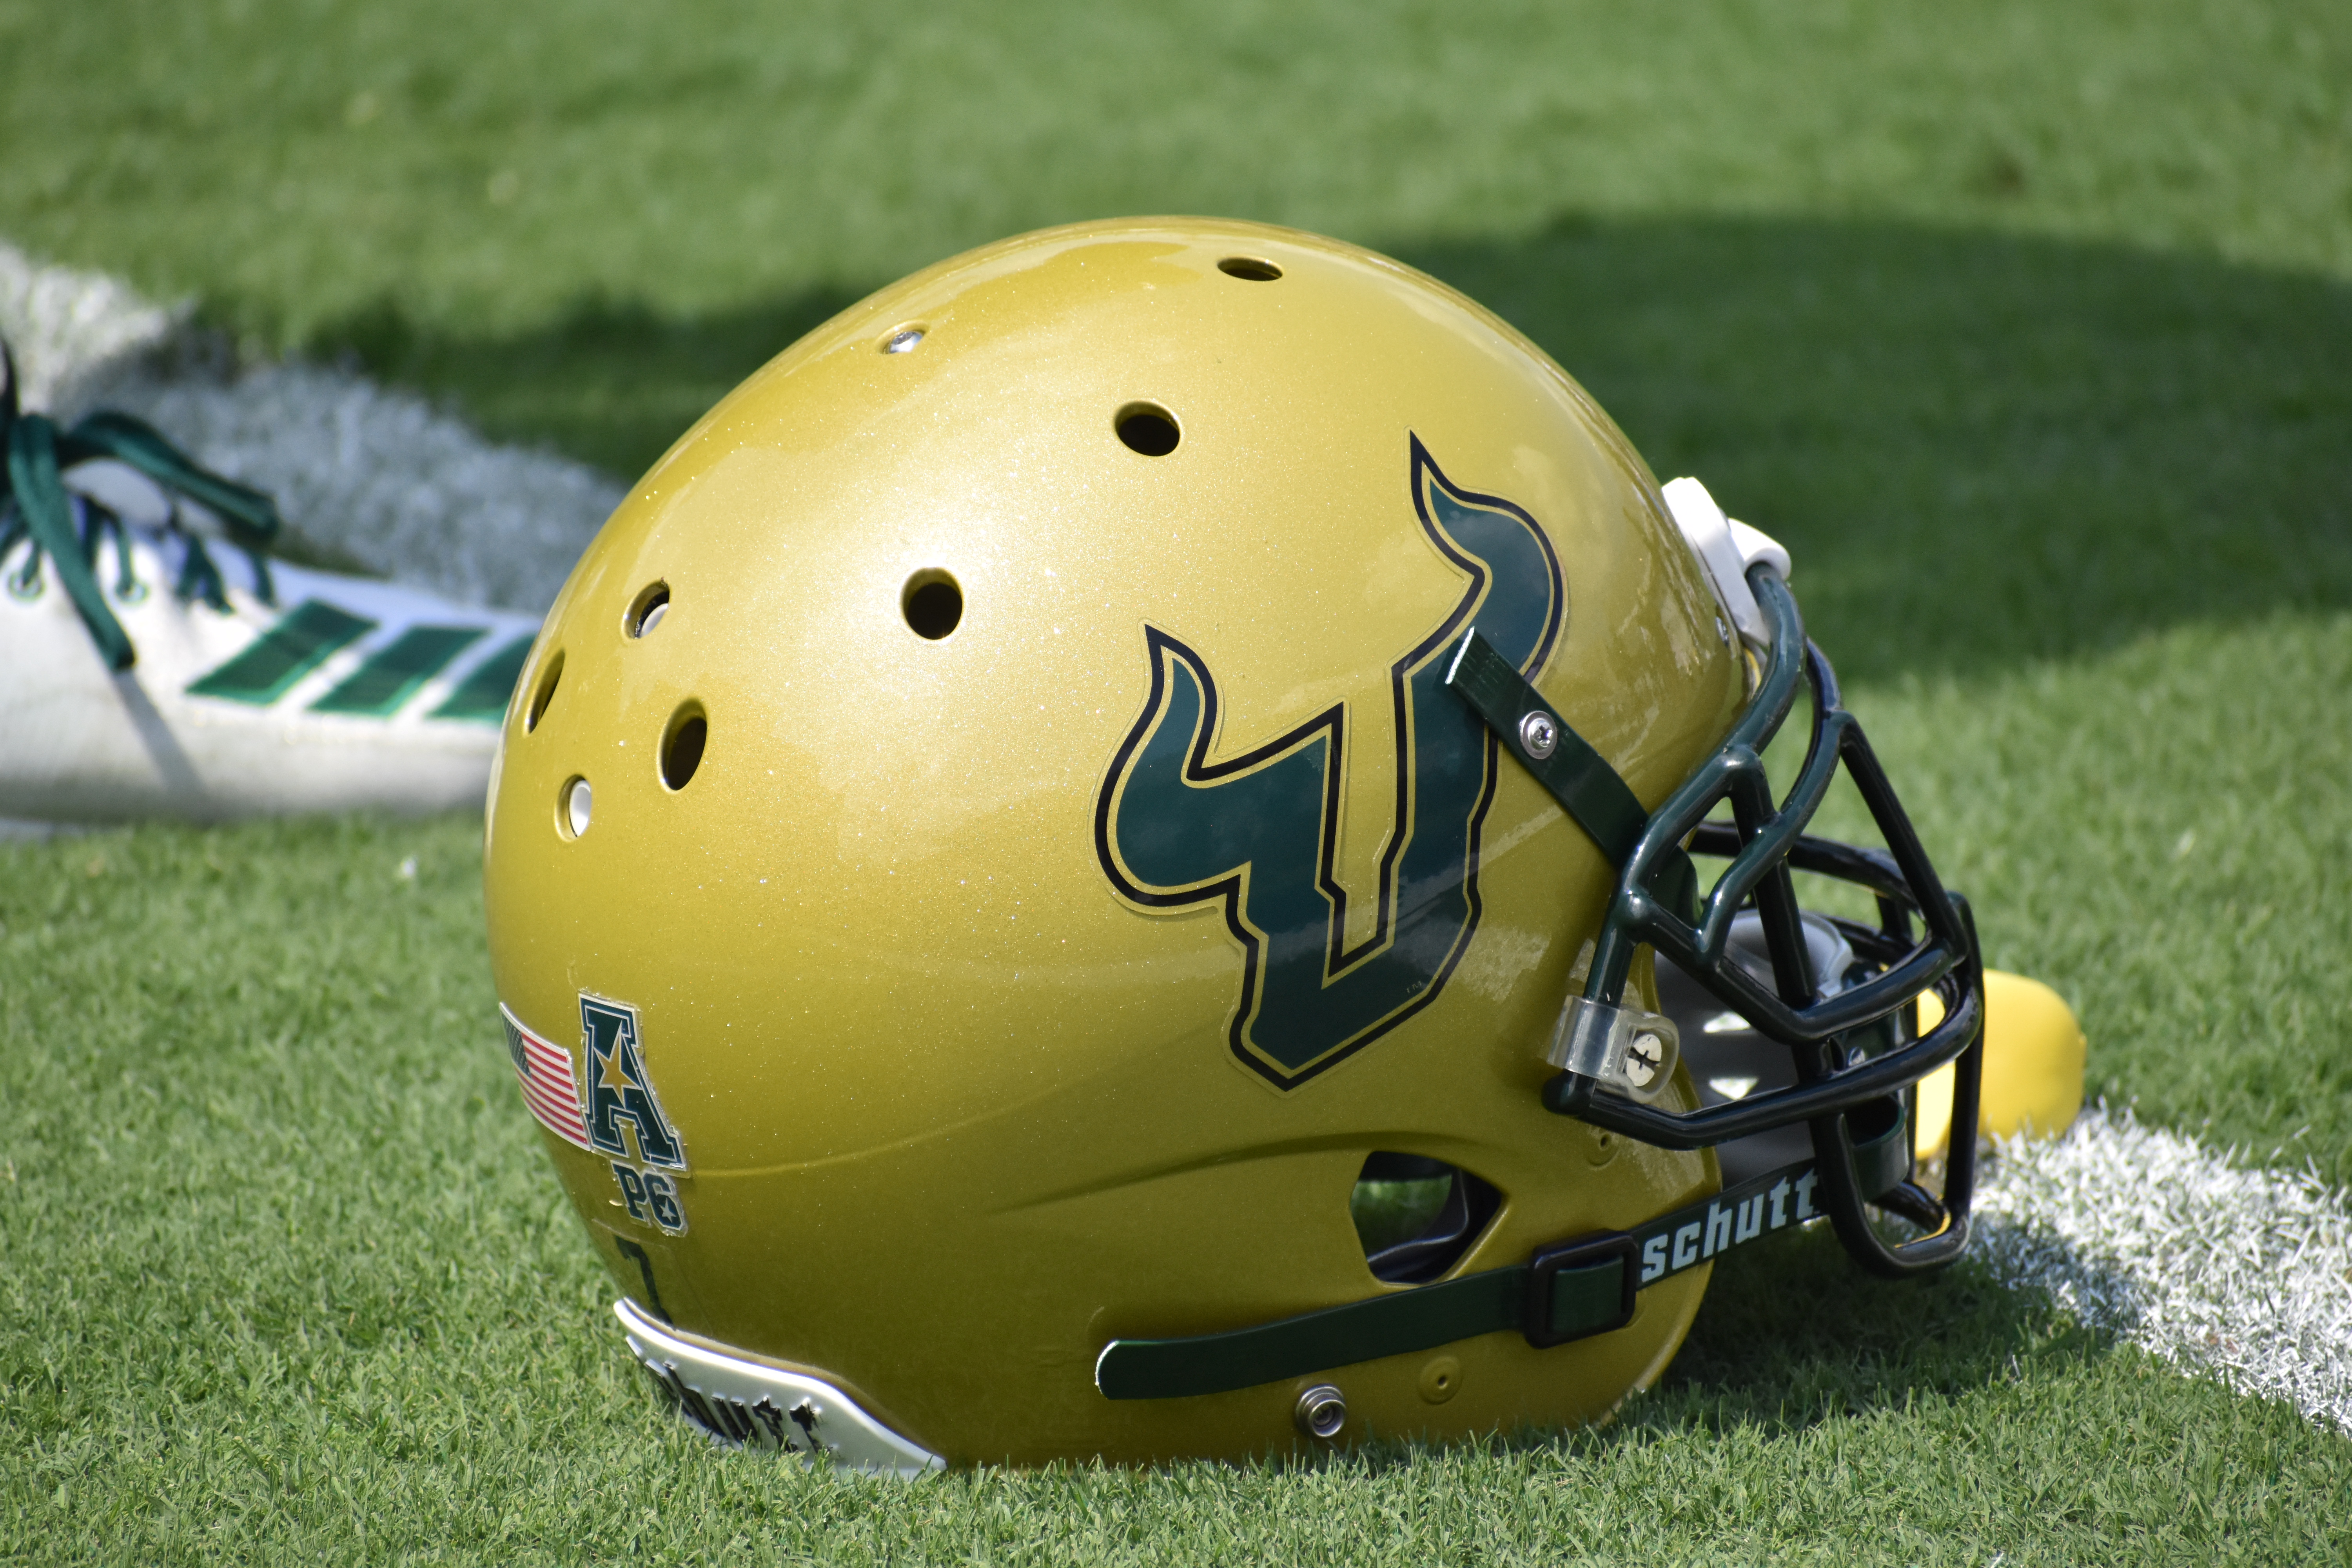 USF-UConn moved up to noon kickoff